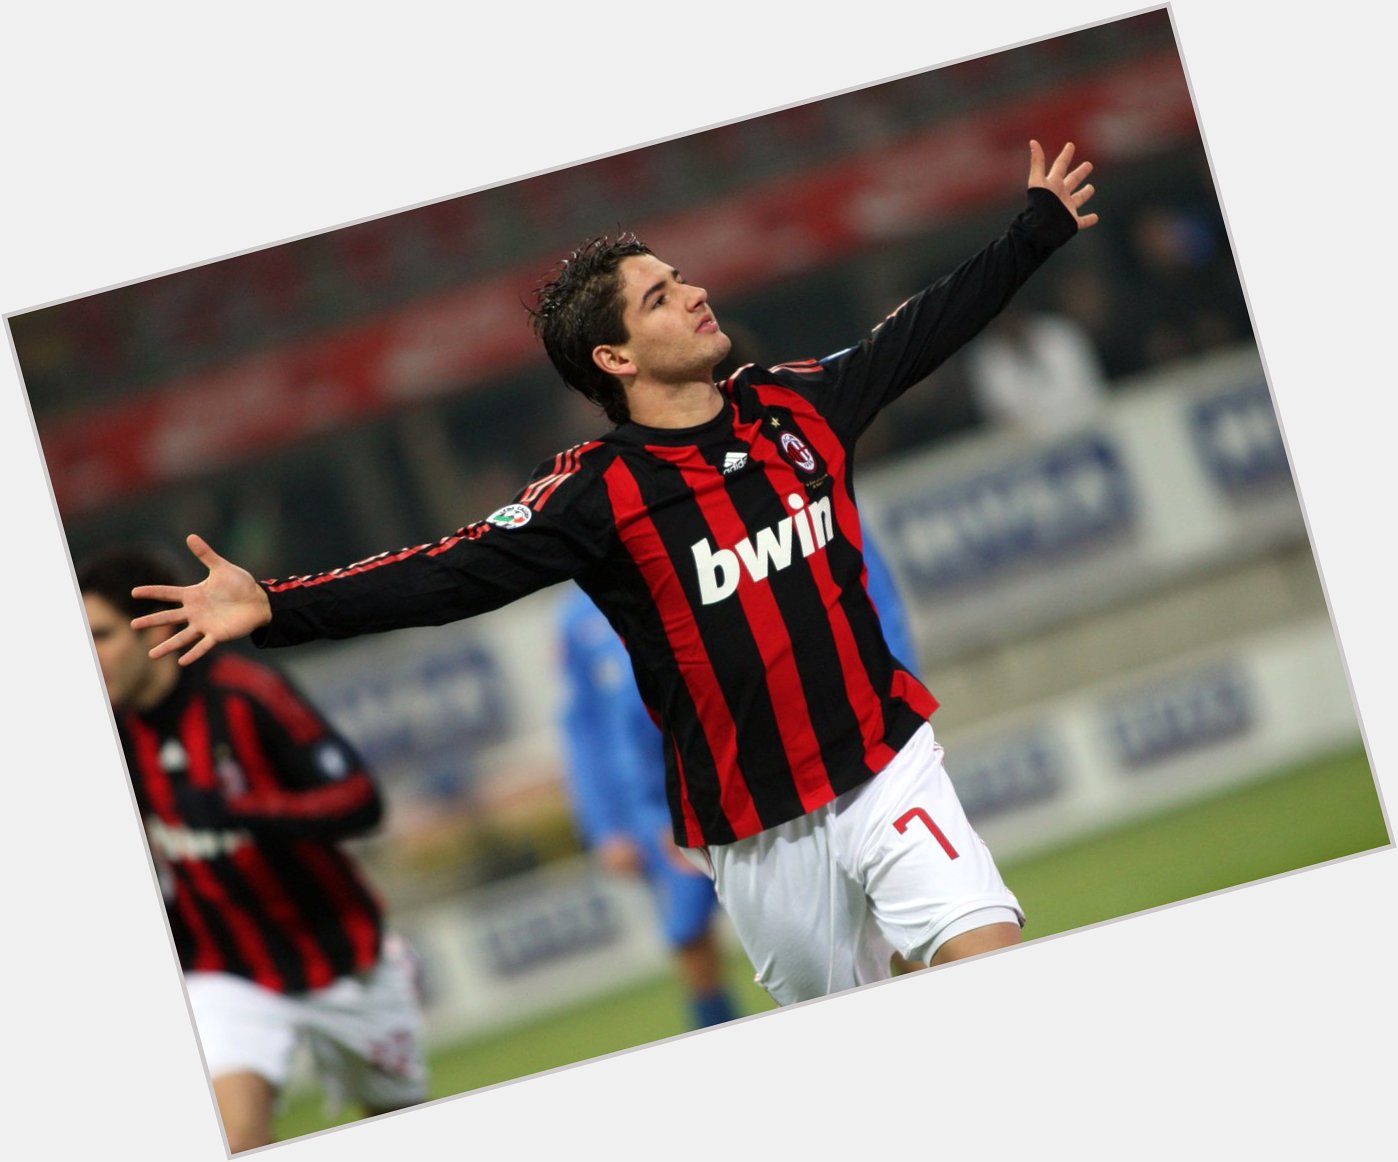 Happy 29th birthday to Alexandre Pato. He played 105 games for Milan and scored 63 goals. 